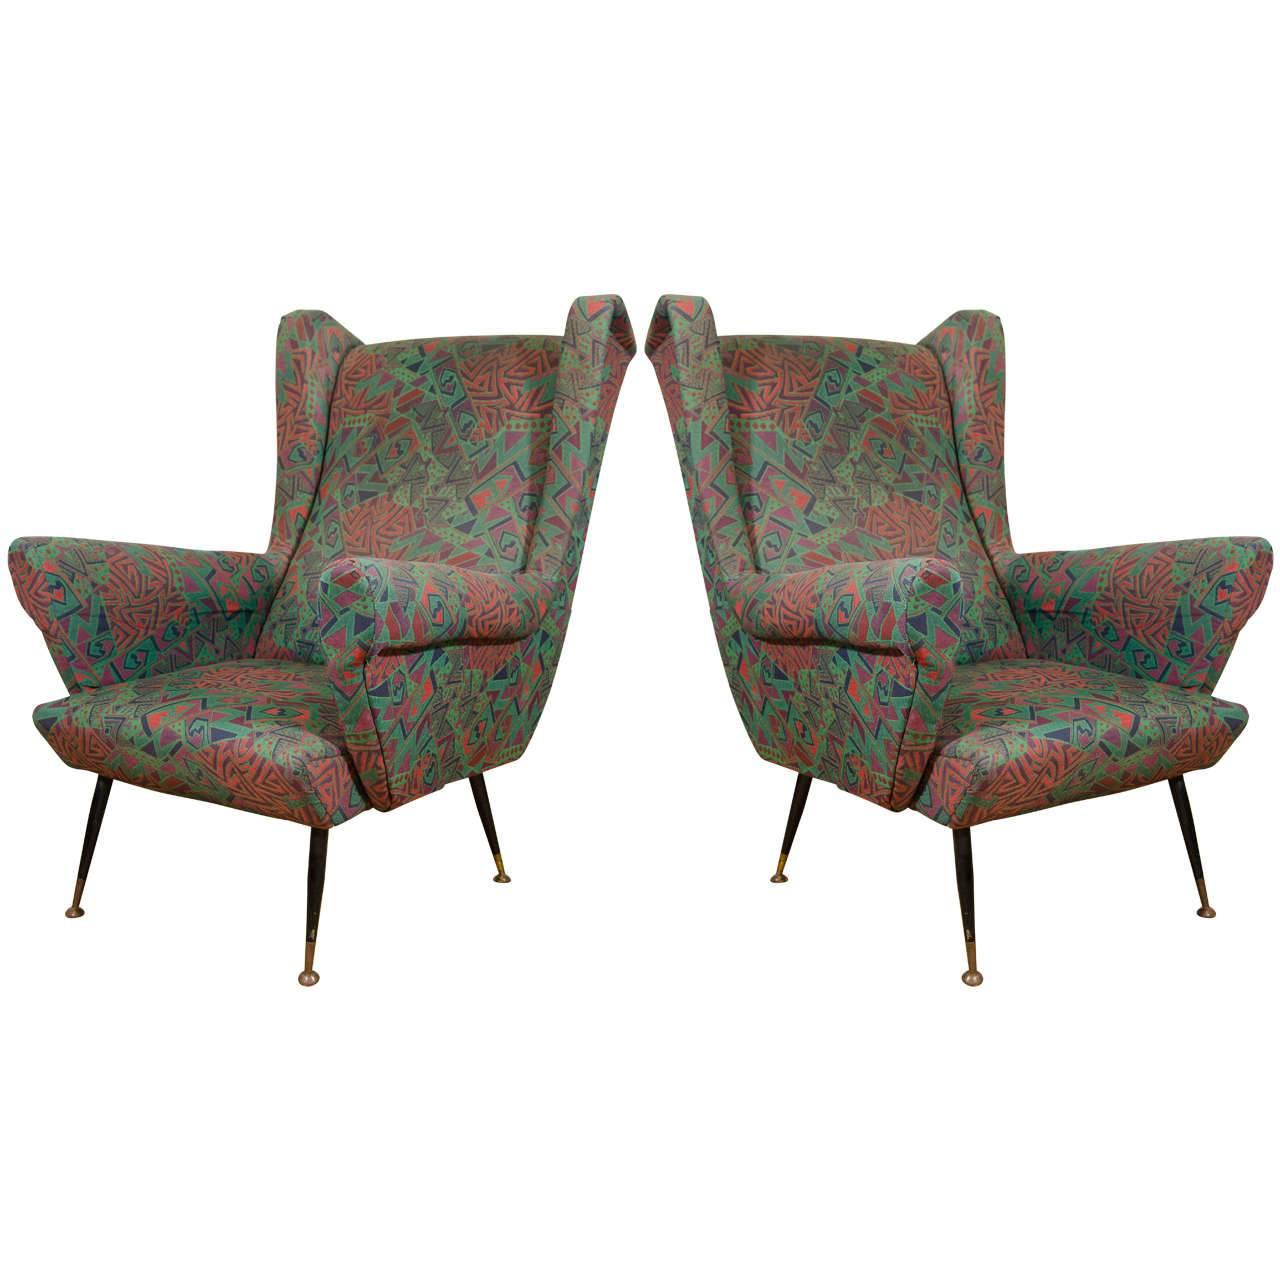 Pair of Wonderful Wingback Italian Armchairs or Lounge Chairs, circa 1950 For Sale